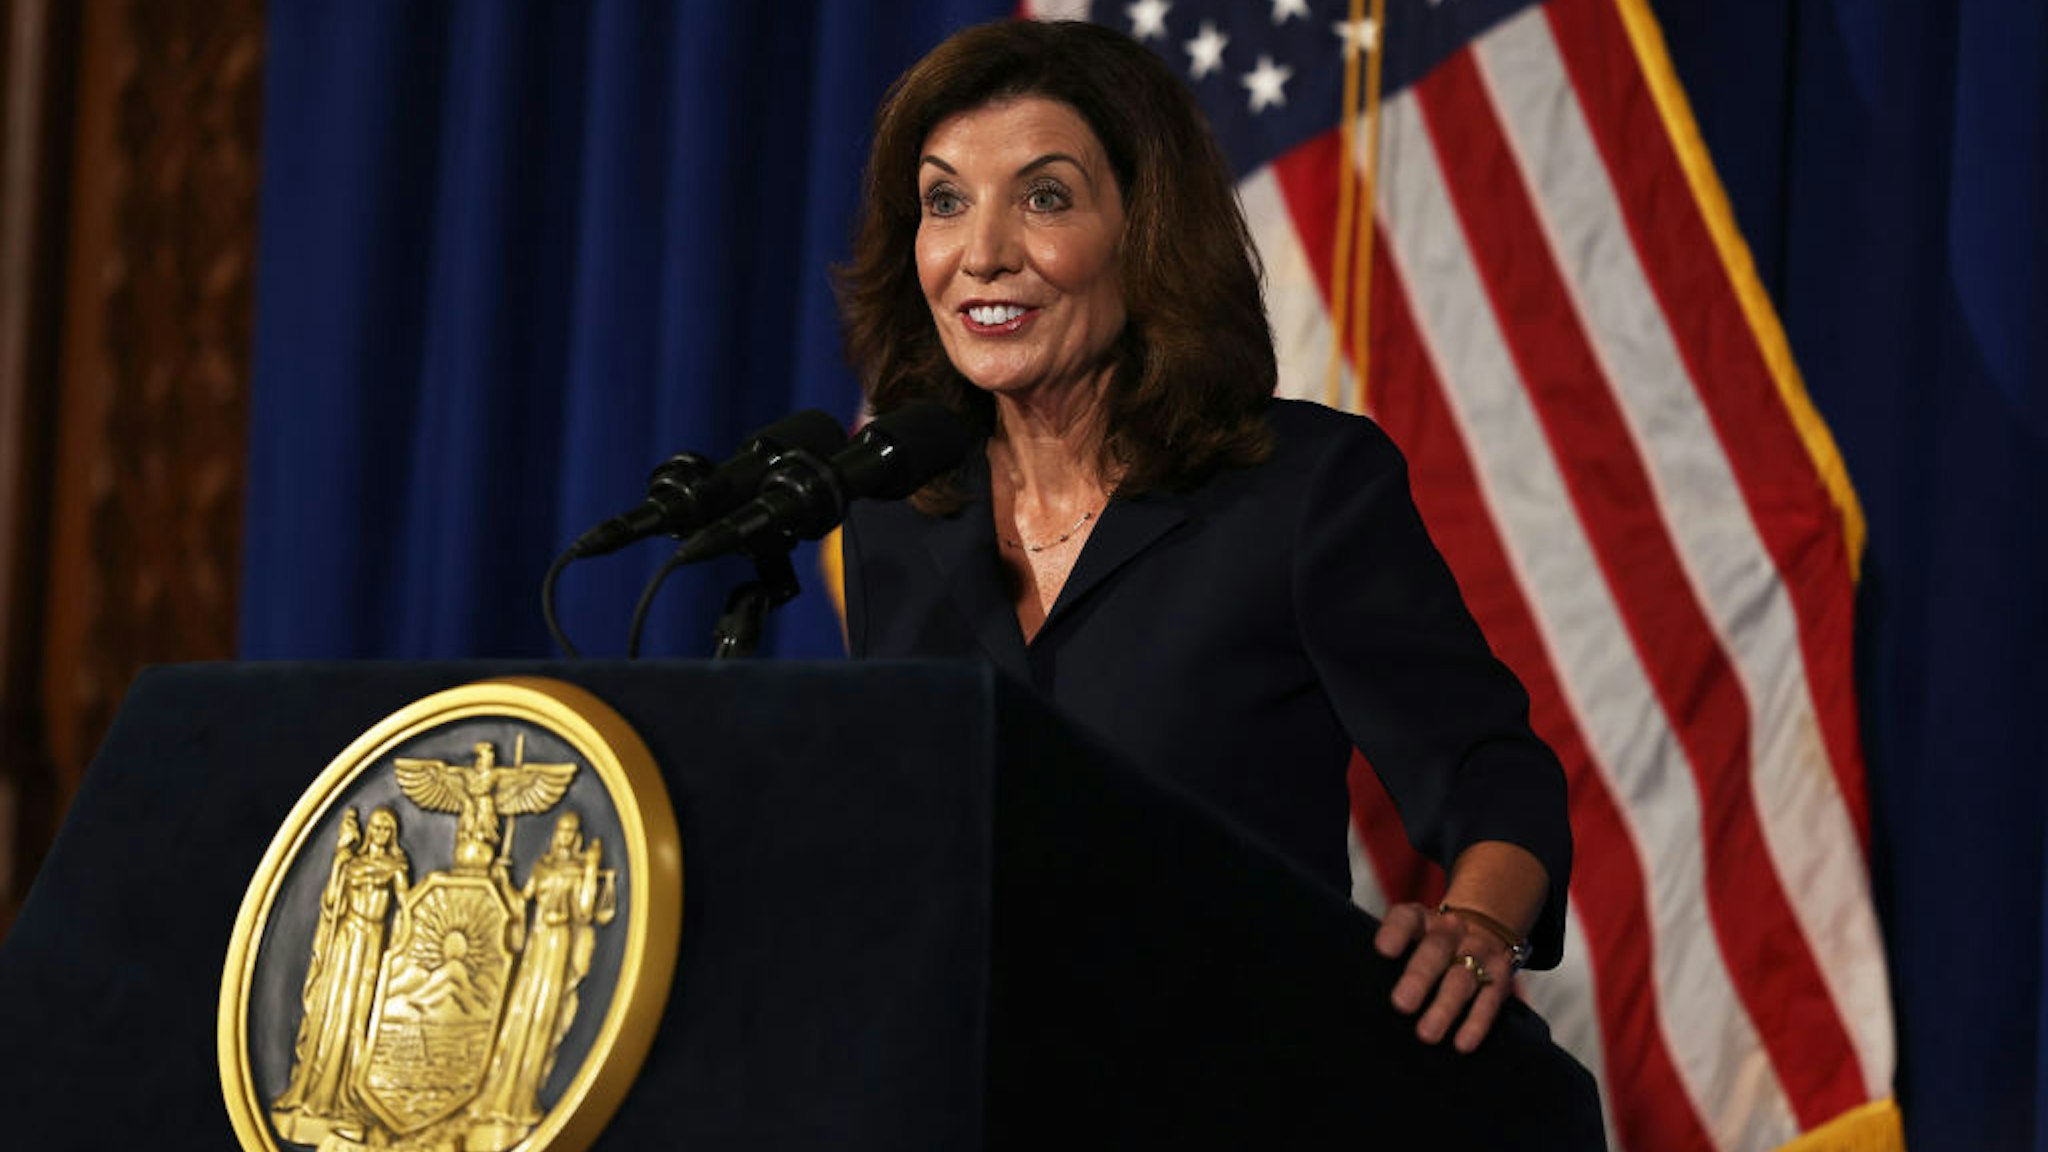 Lt. Gov. Kathy Hochul speaks during a press conference at the New York State Capitol on August 11, 2021 in Albany City.